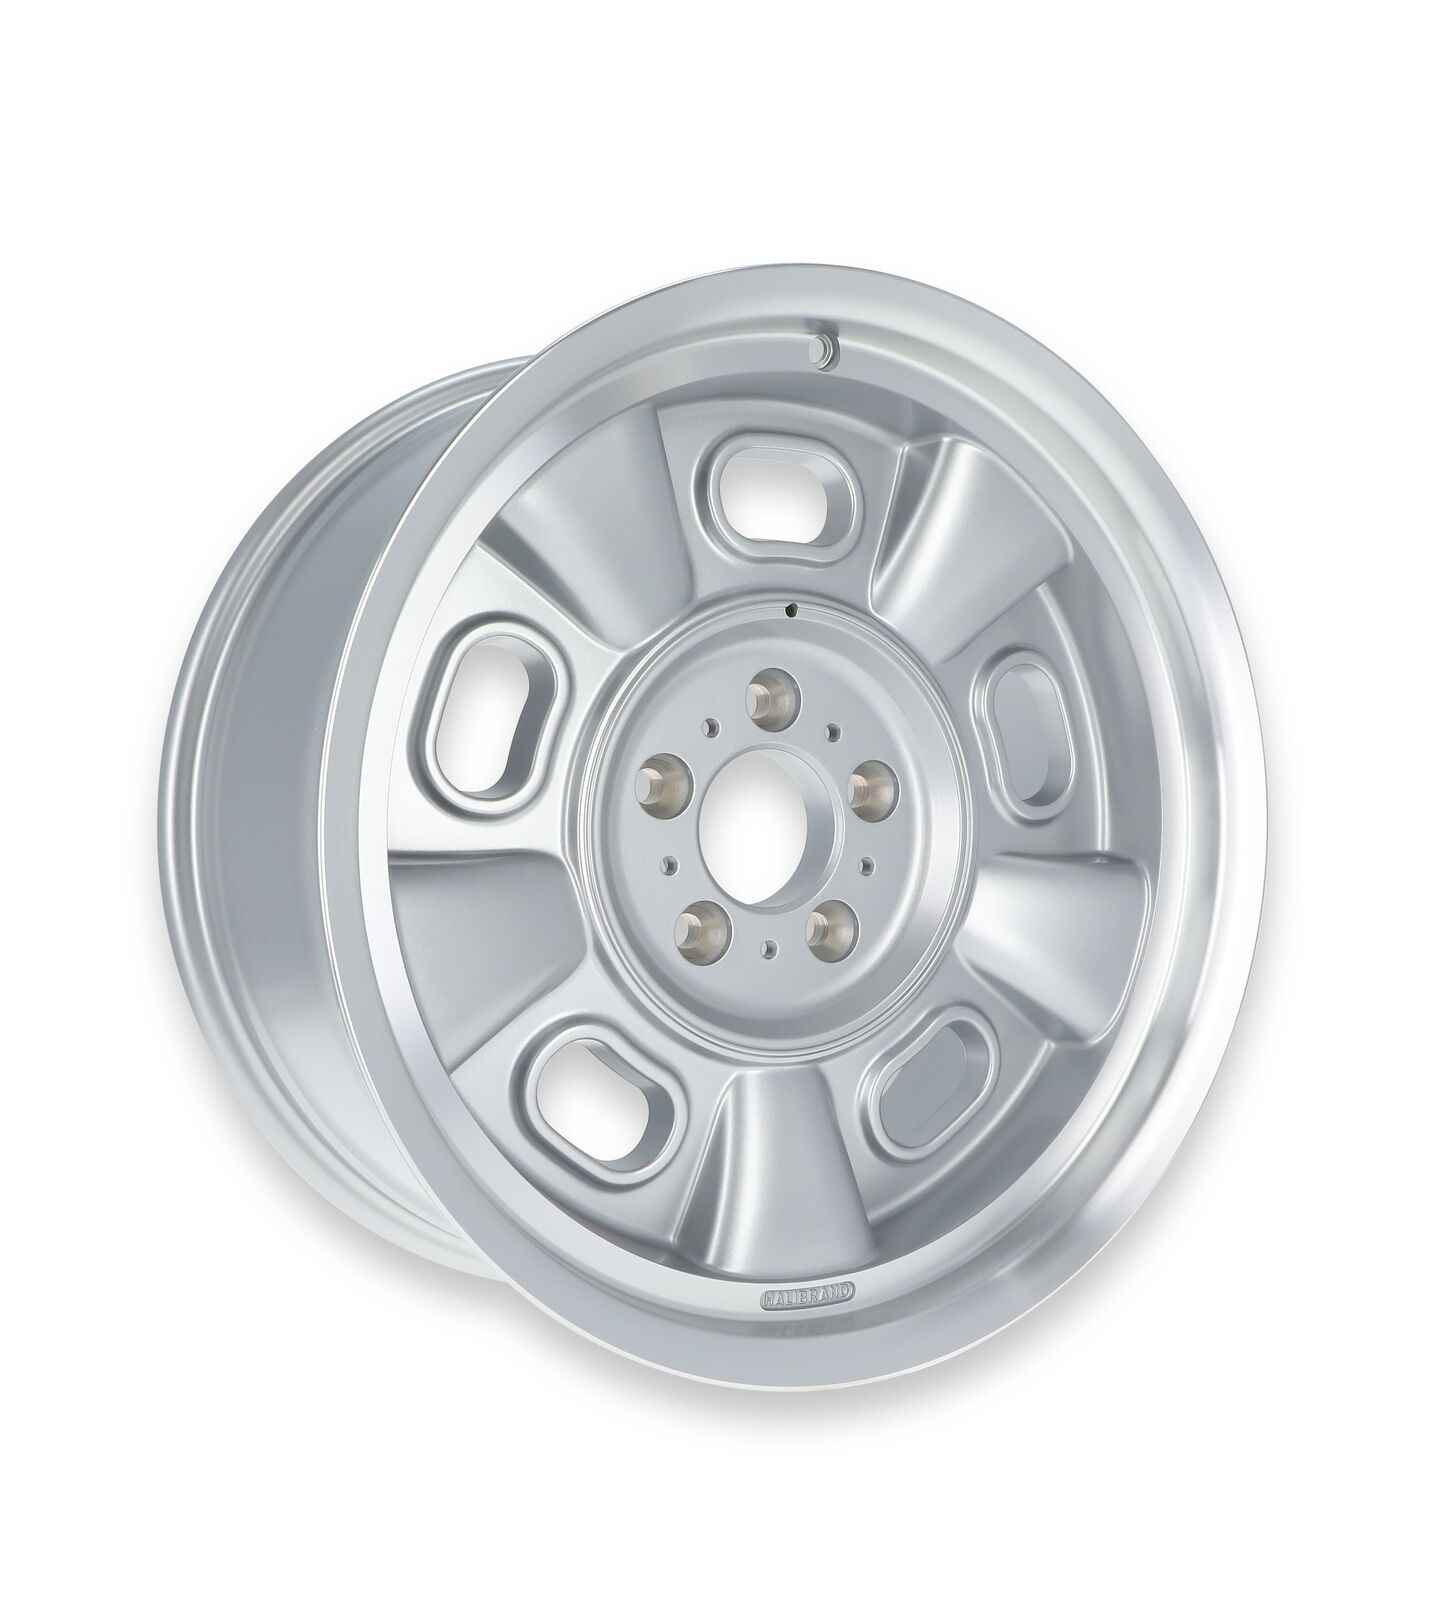 HB002-007 Halibrand Indy Roadster - 19x8.5 - 5x5 - 5.25 BS Silver Machined